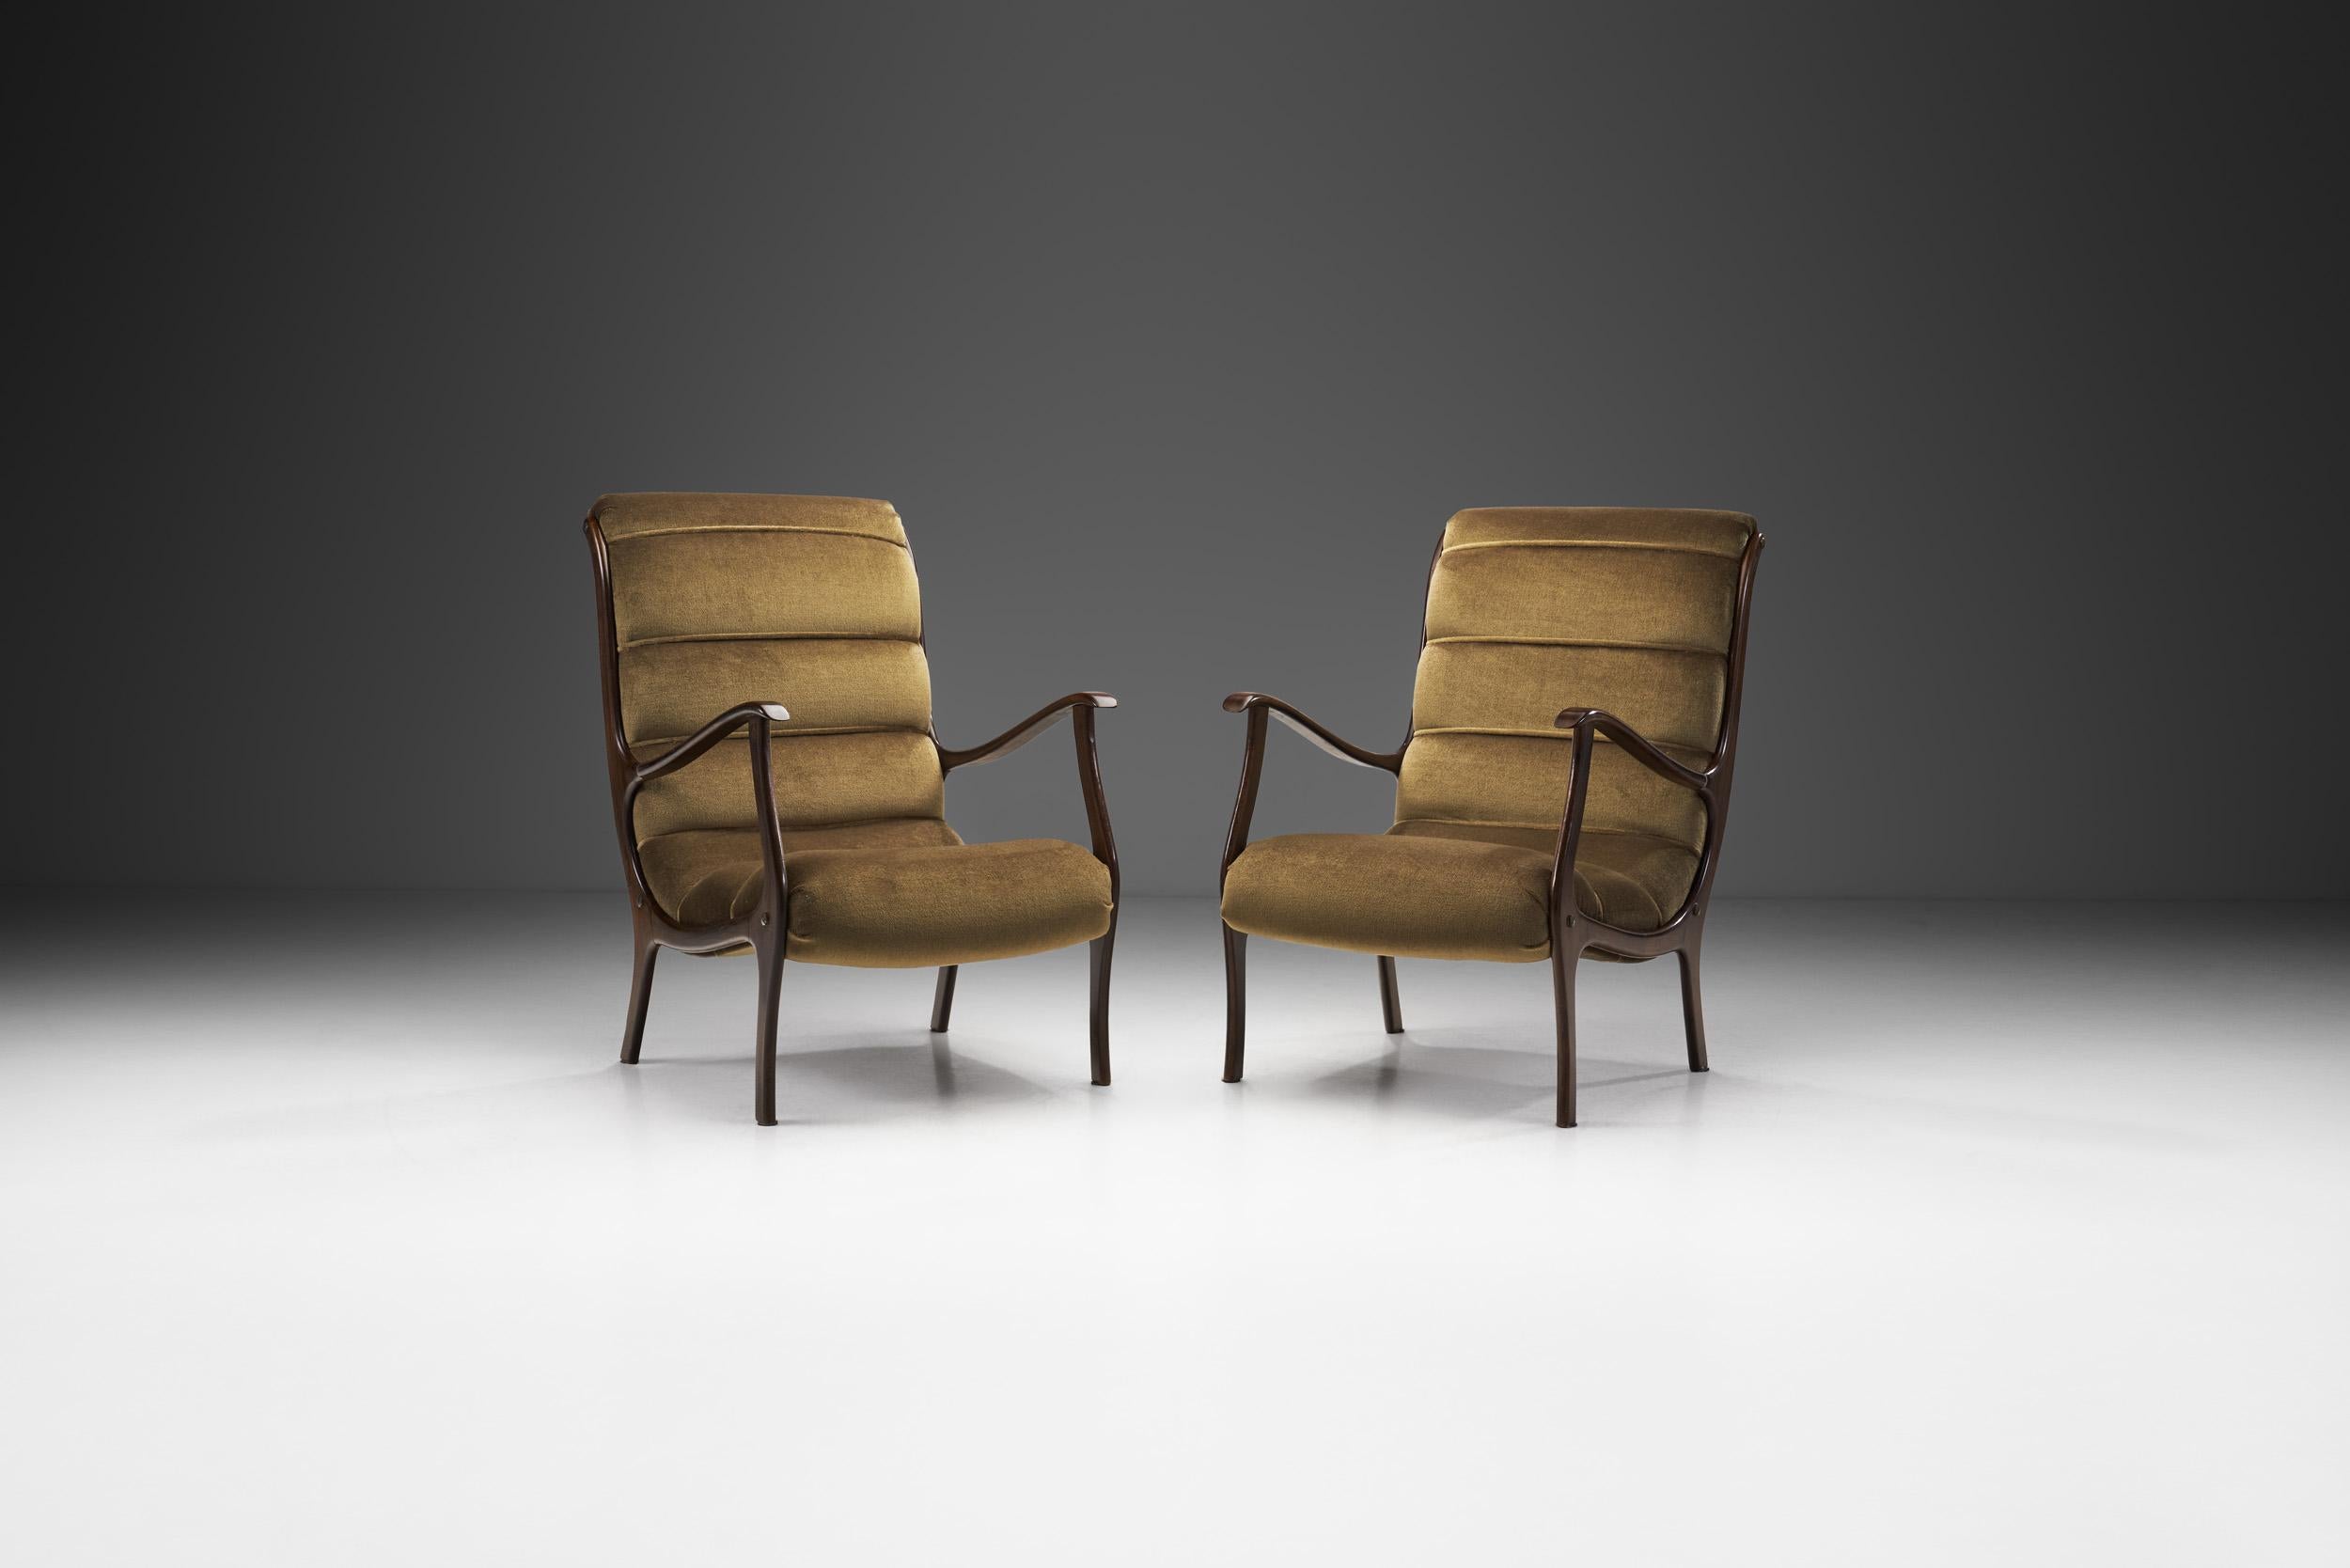 Like the 1958 Mitzi armchair, this model belongs to the most well-known chair designs of Italian designer, Ezio Longhi. This pair of lounge chairs takes one back to post-war Italy, when the now world-famous free form designs of the 1950s and 60s